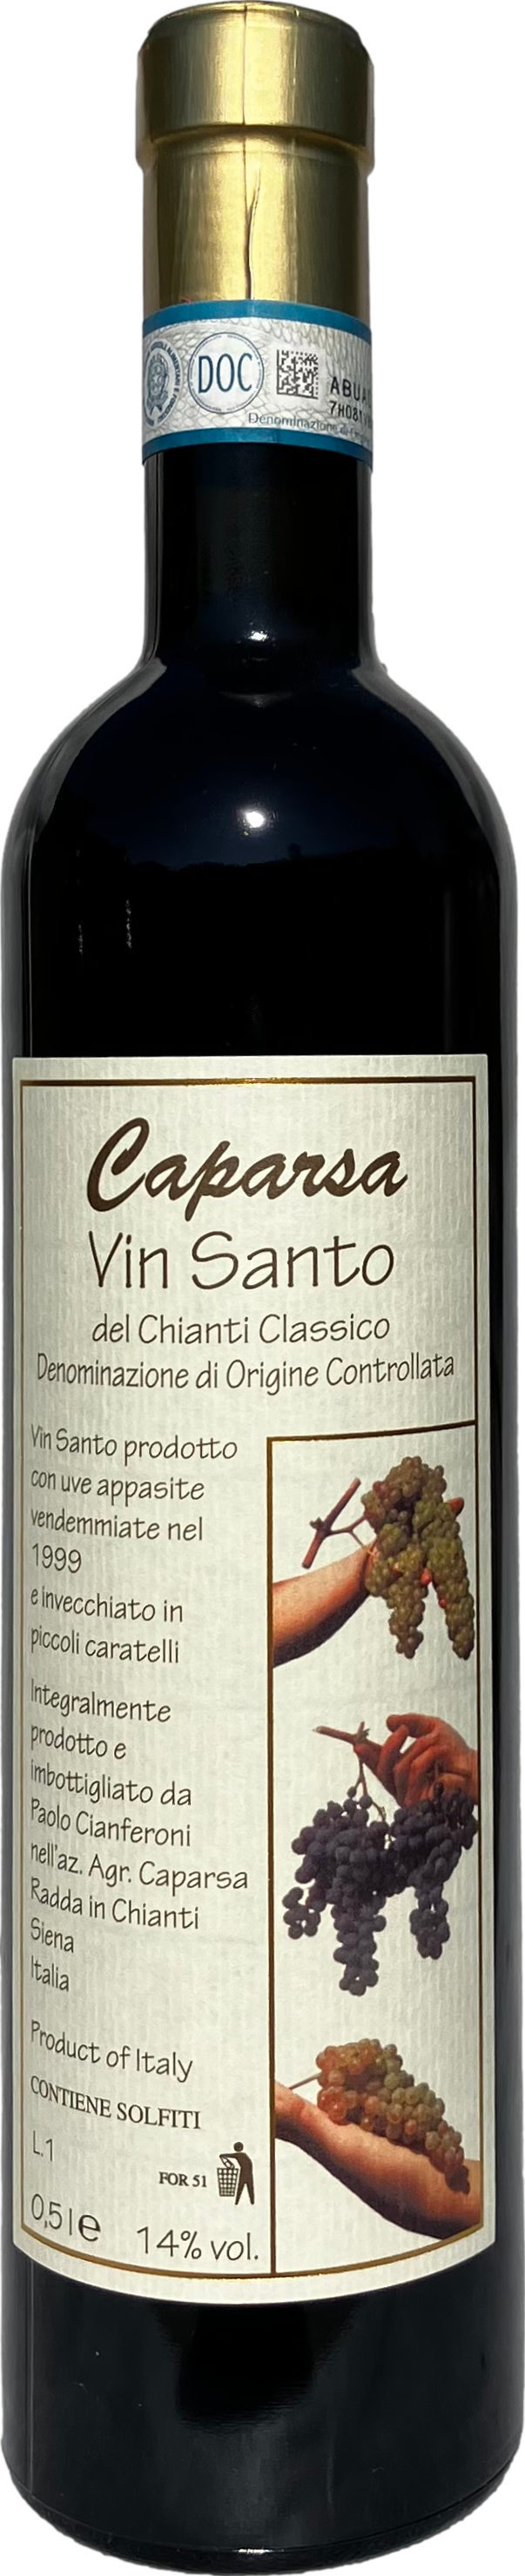 Product image of Caparsa Vin Santo Chianti Classico 1999 from 8wines